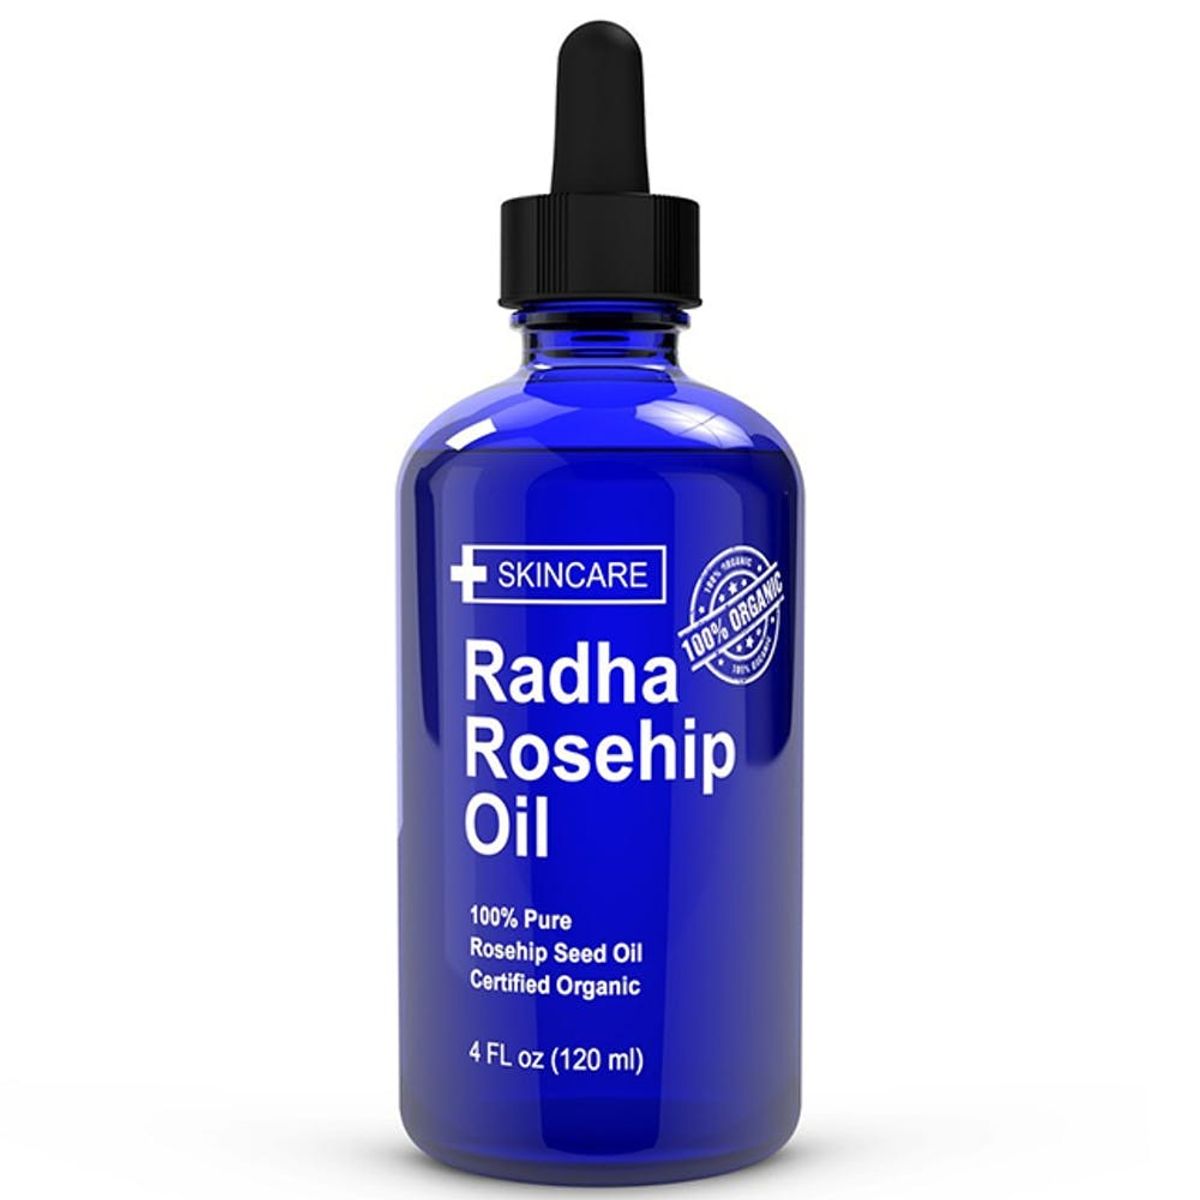 4 Reasons Why Rosehip Seed Oil Is a Must-Have for Your Skincare Routine